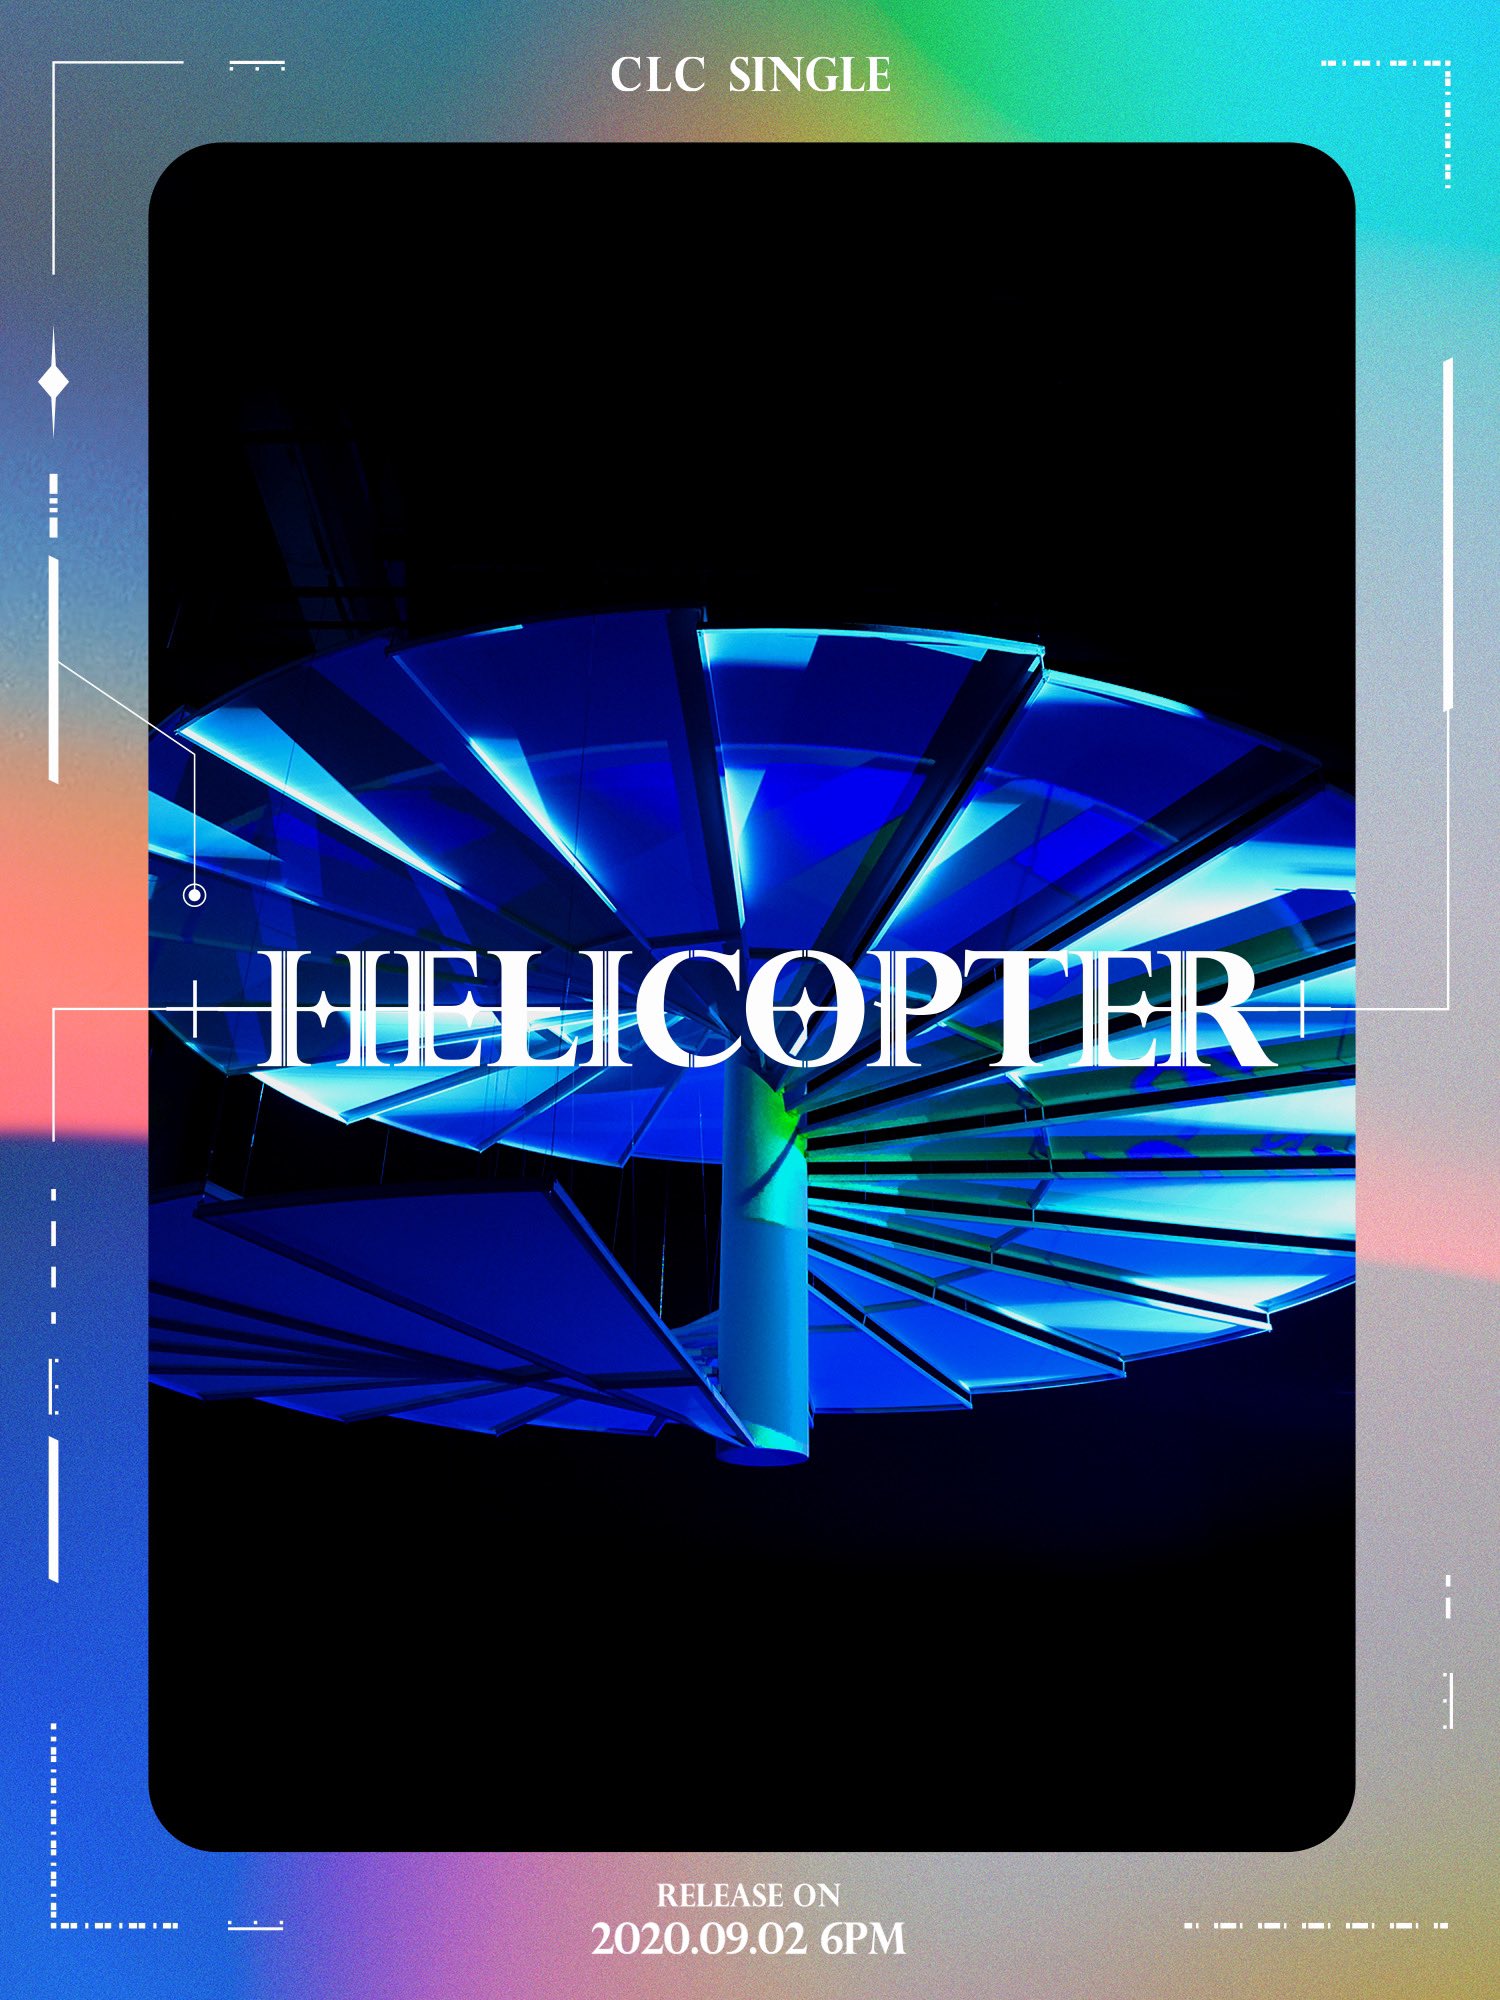 CLC(씨엘씨) Single [HELICOPTER] Comeback Poster